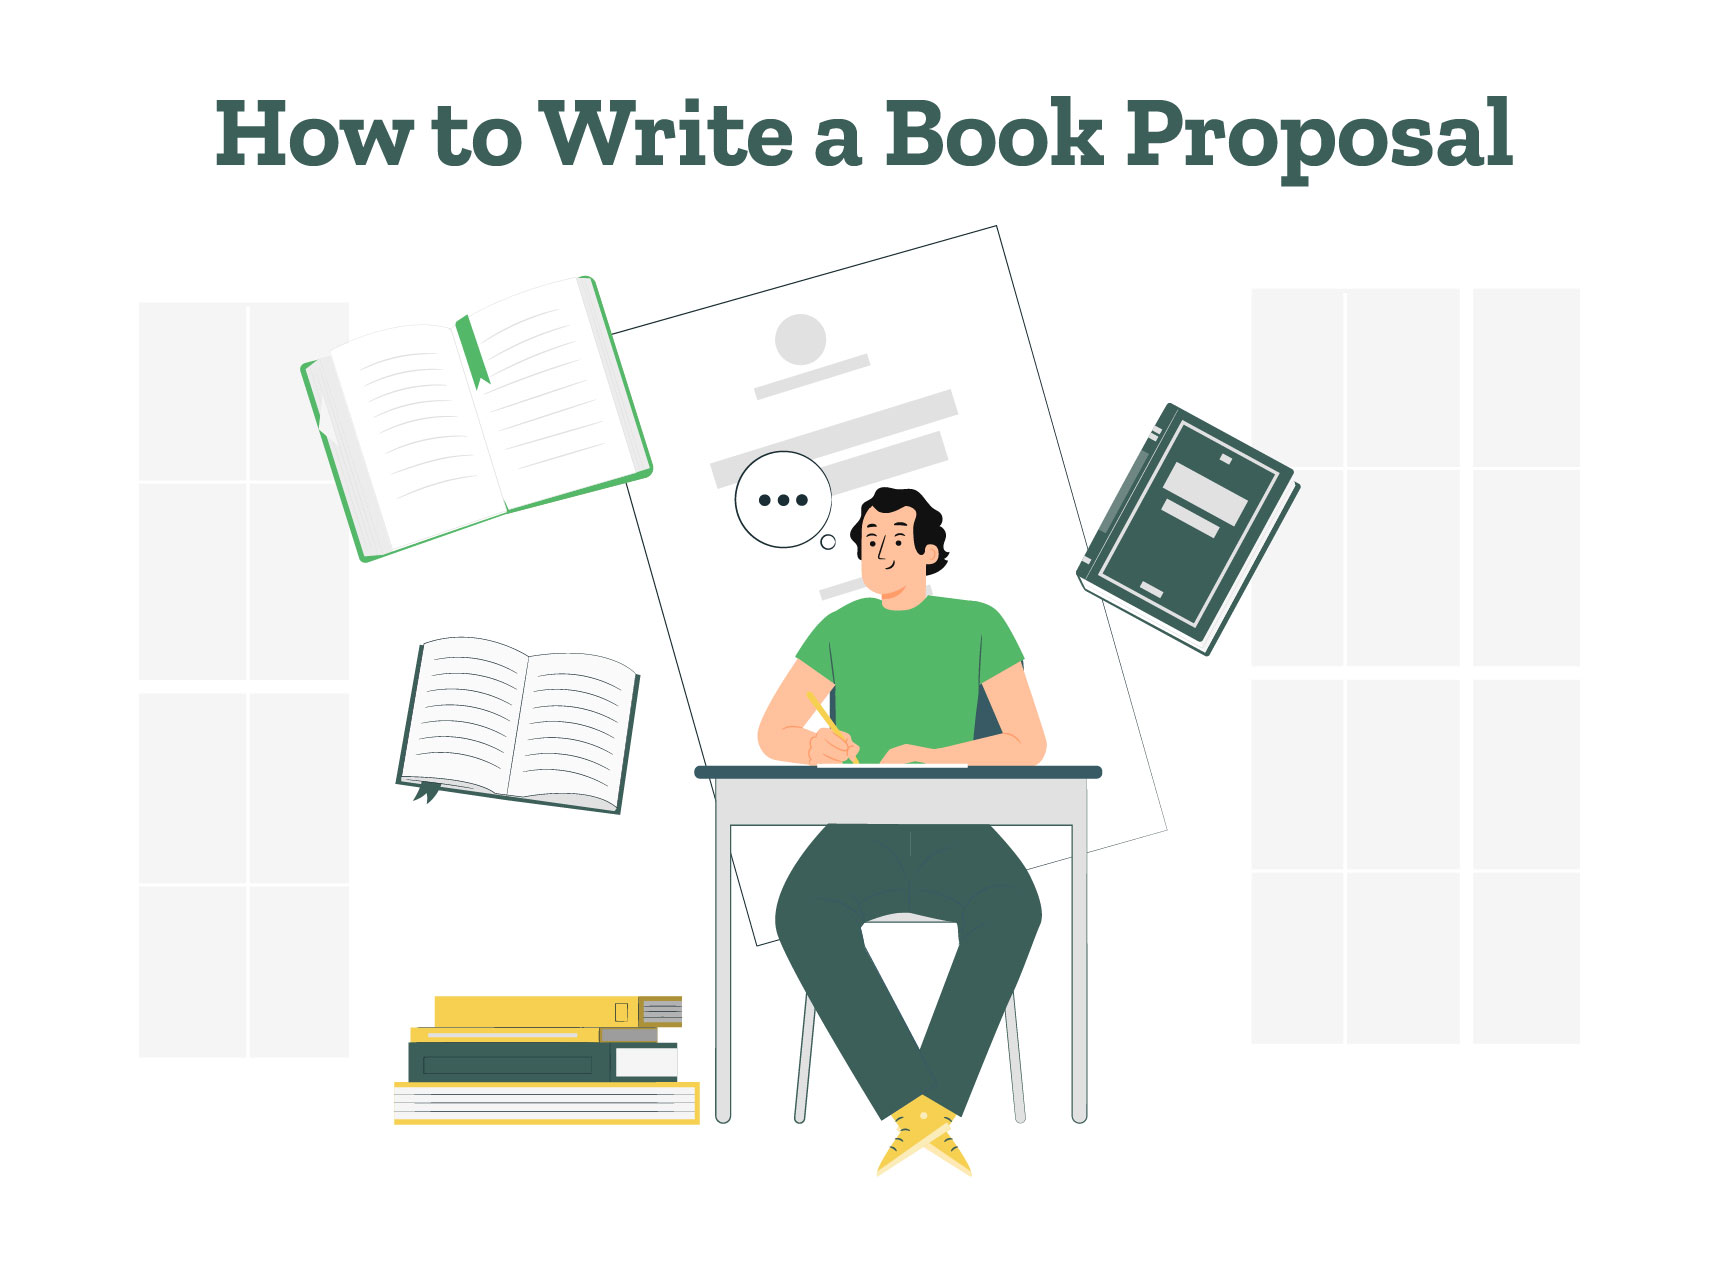 An author is wondering about how to write a book proposal.